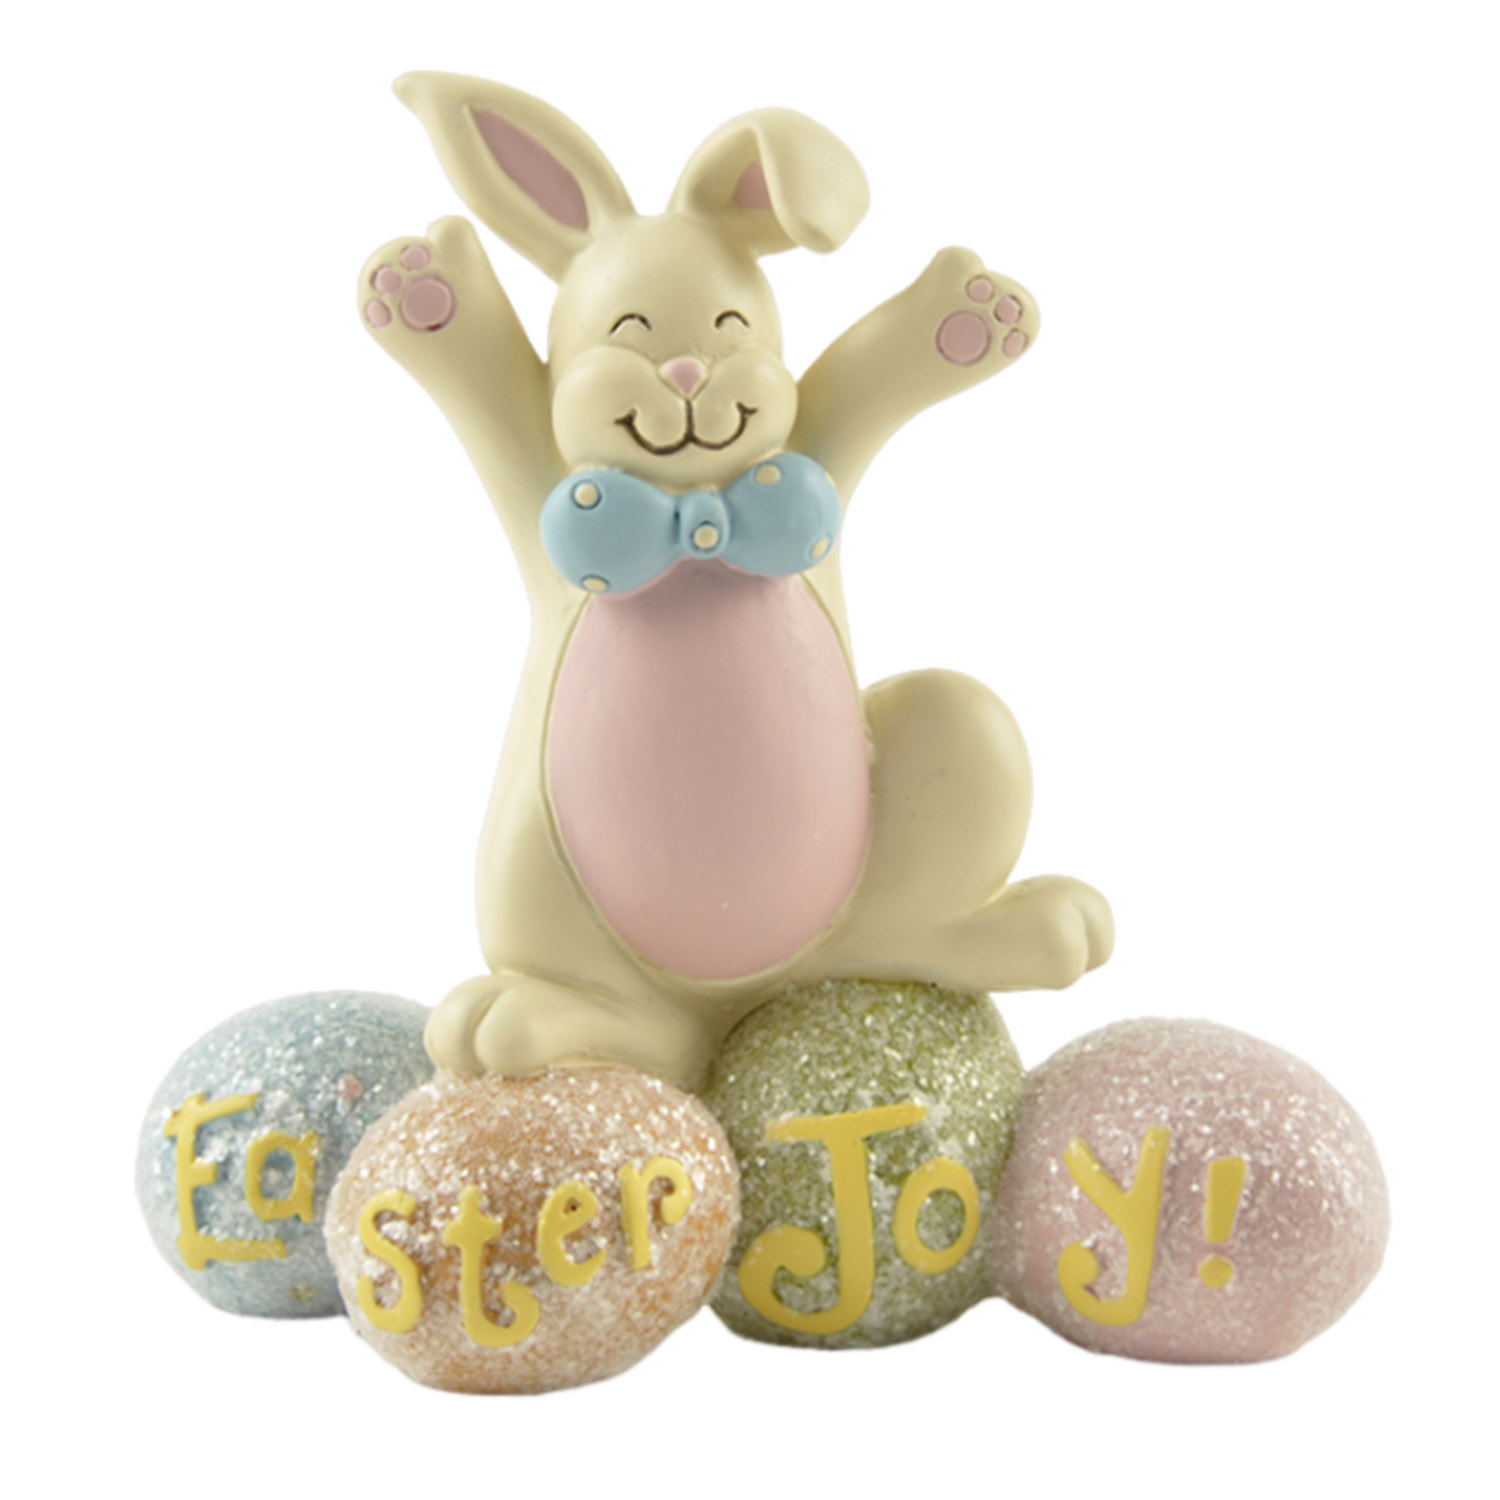 Adorable Easter Bunny Figurine with Glittery 'Easter Joy!' Eggs – Perfect for Springtime Home Decoration 151-89250